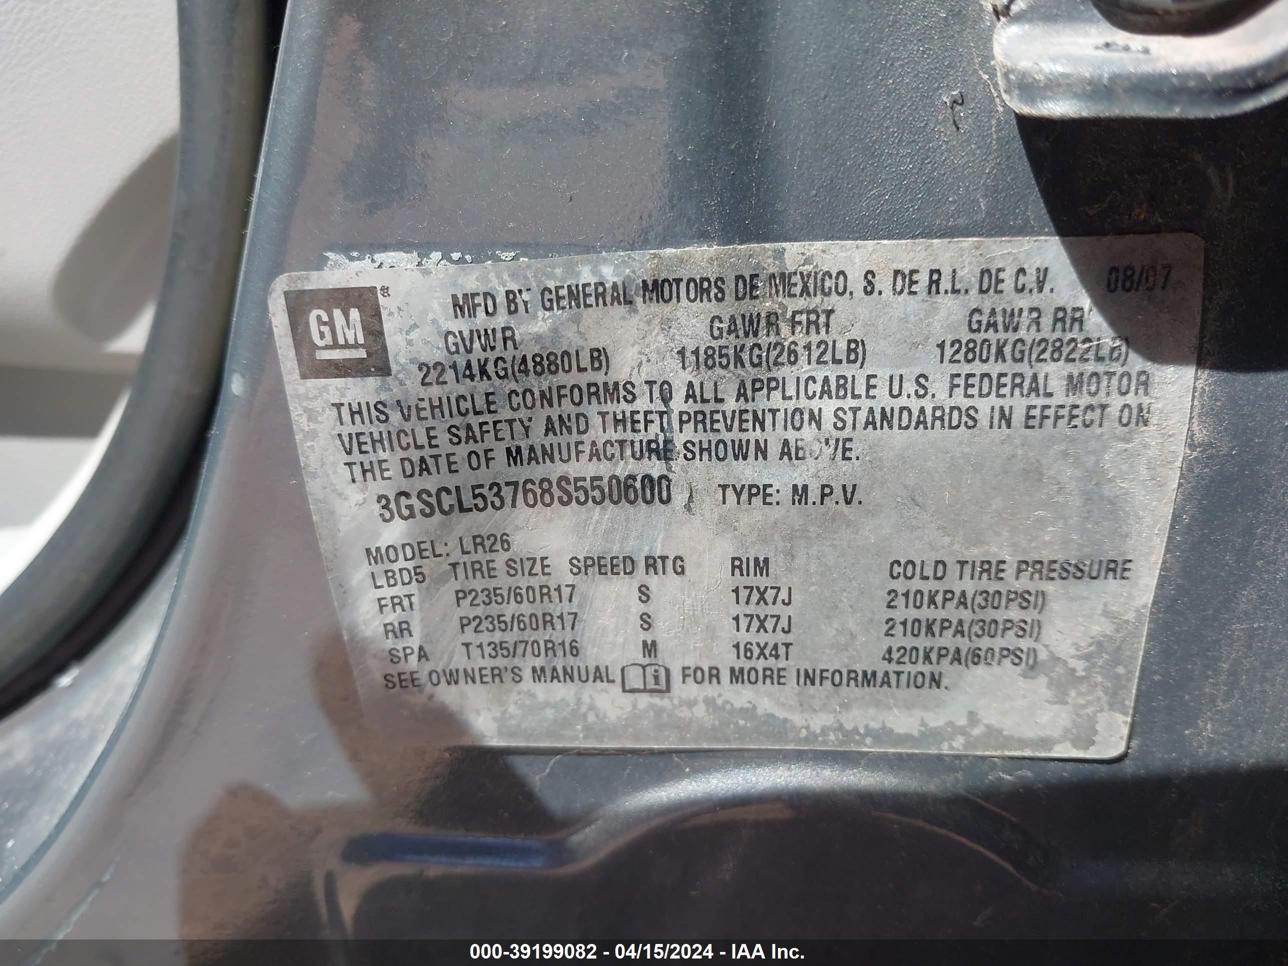 3GSCL53768S550600  - SATURN VUE  2008 IMG - 8